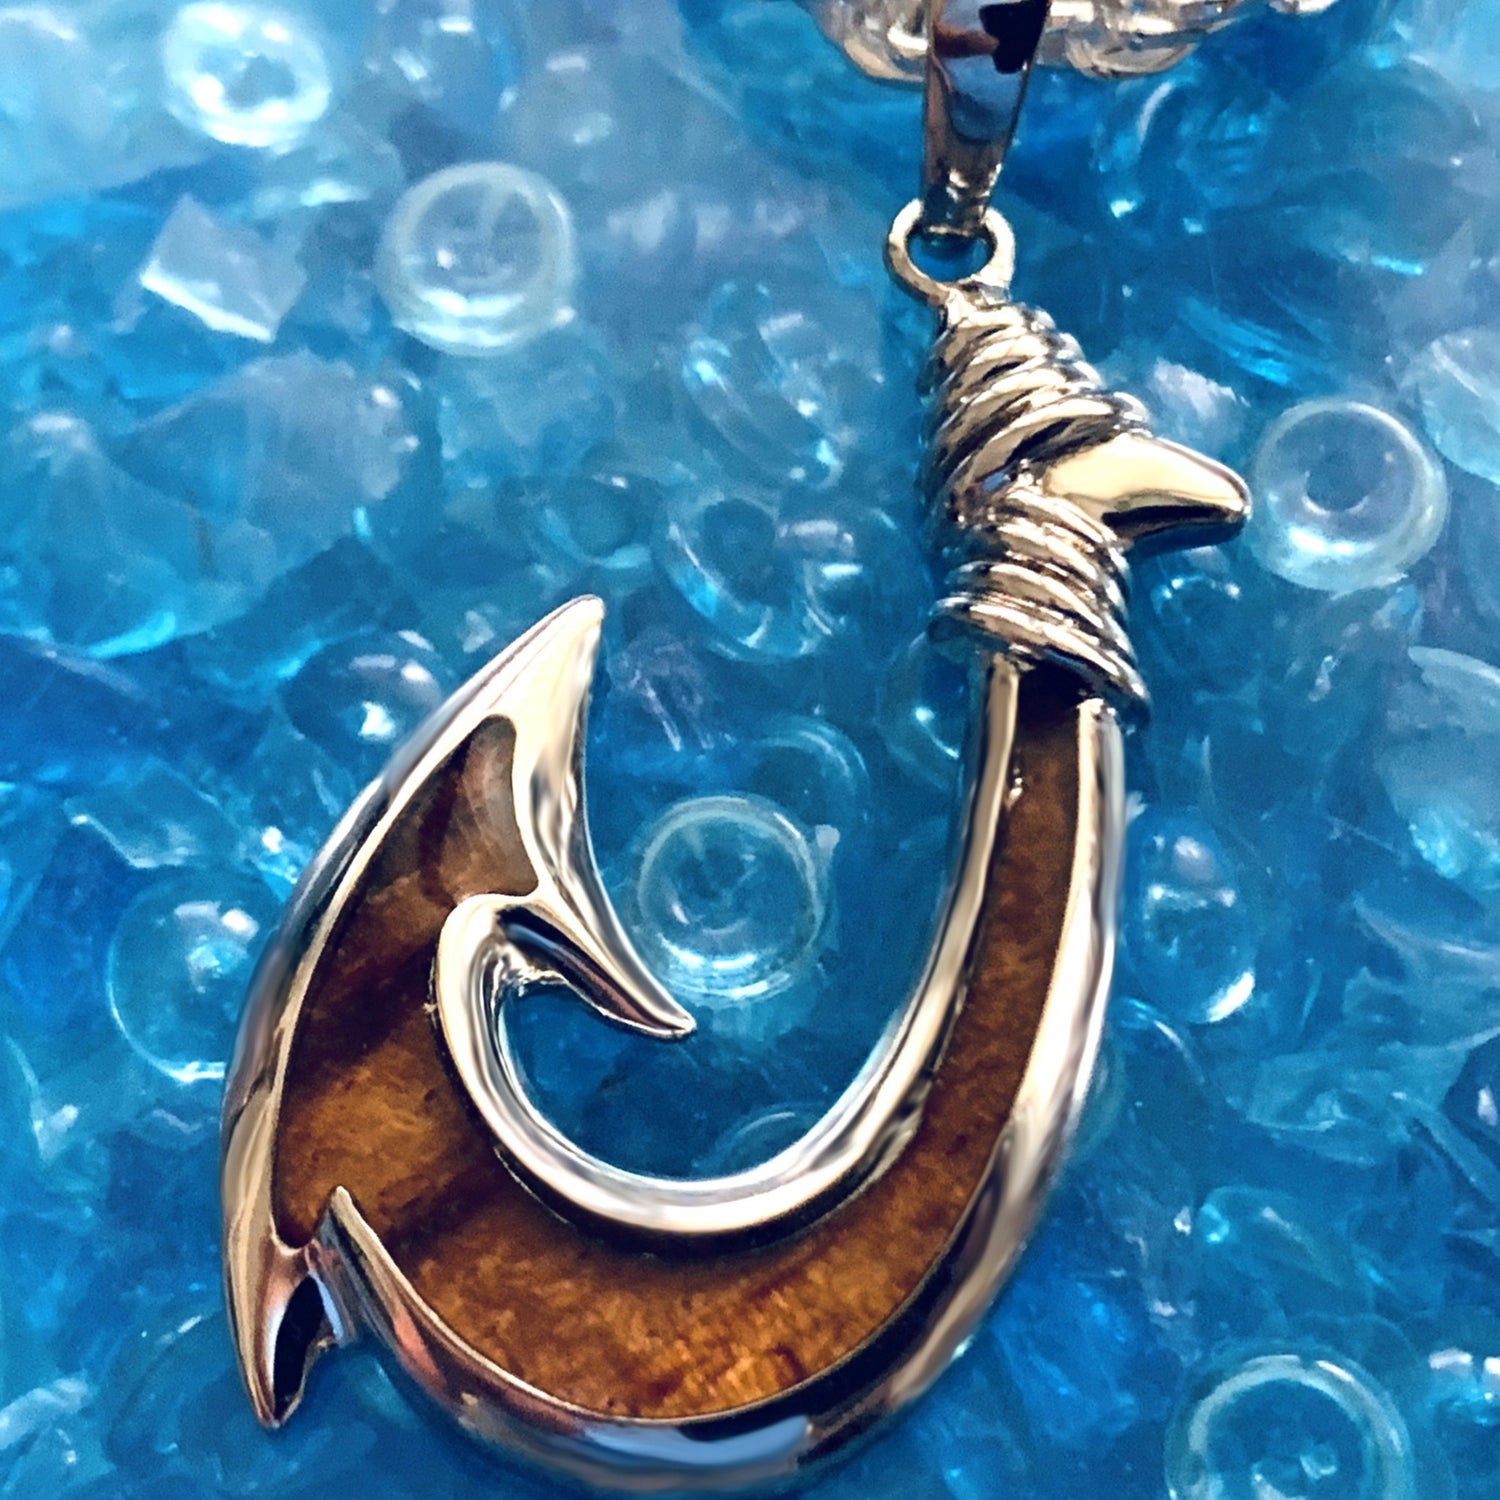 Lā'au Koa Fish Hook Pendant with Gold Plated Stainless Steel Link